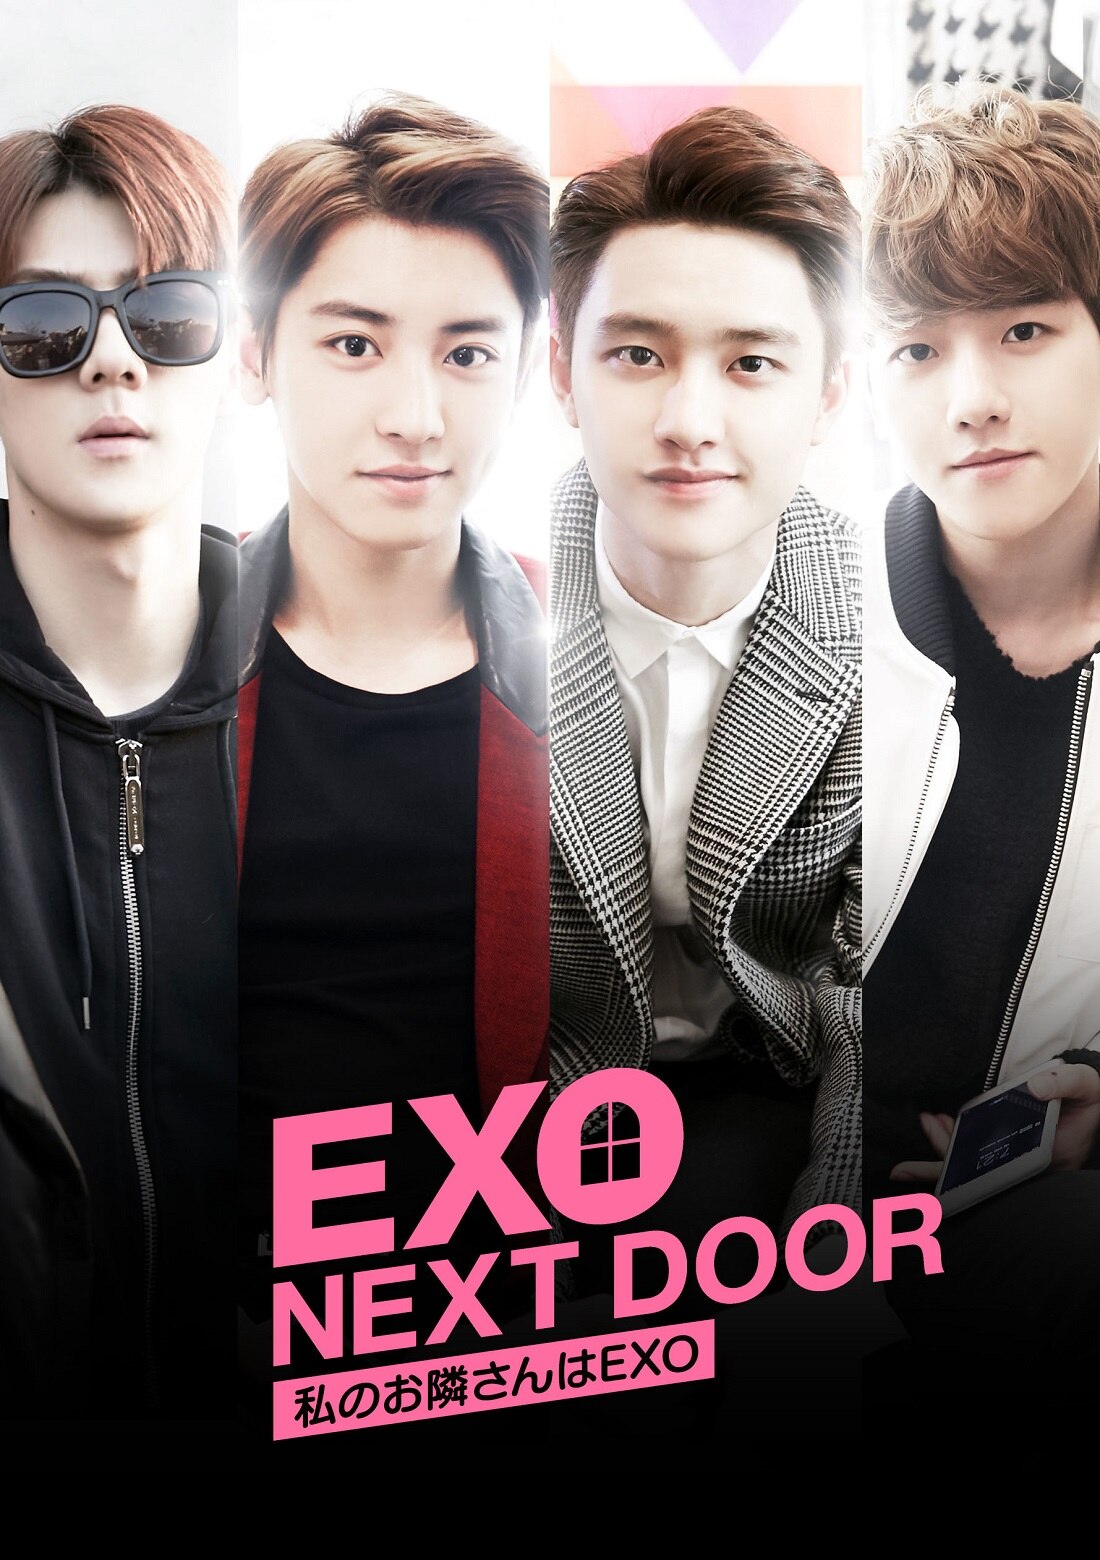 Dvd Of Exo S First Starring Drama Exo Next Door My Neighbor Is Exo Will Be Released On 7 27 Wed